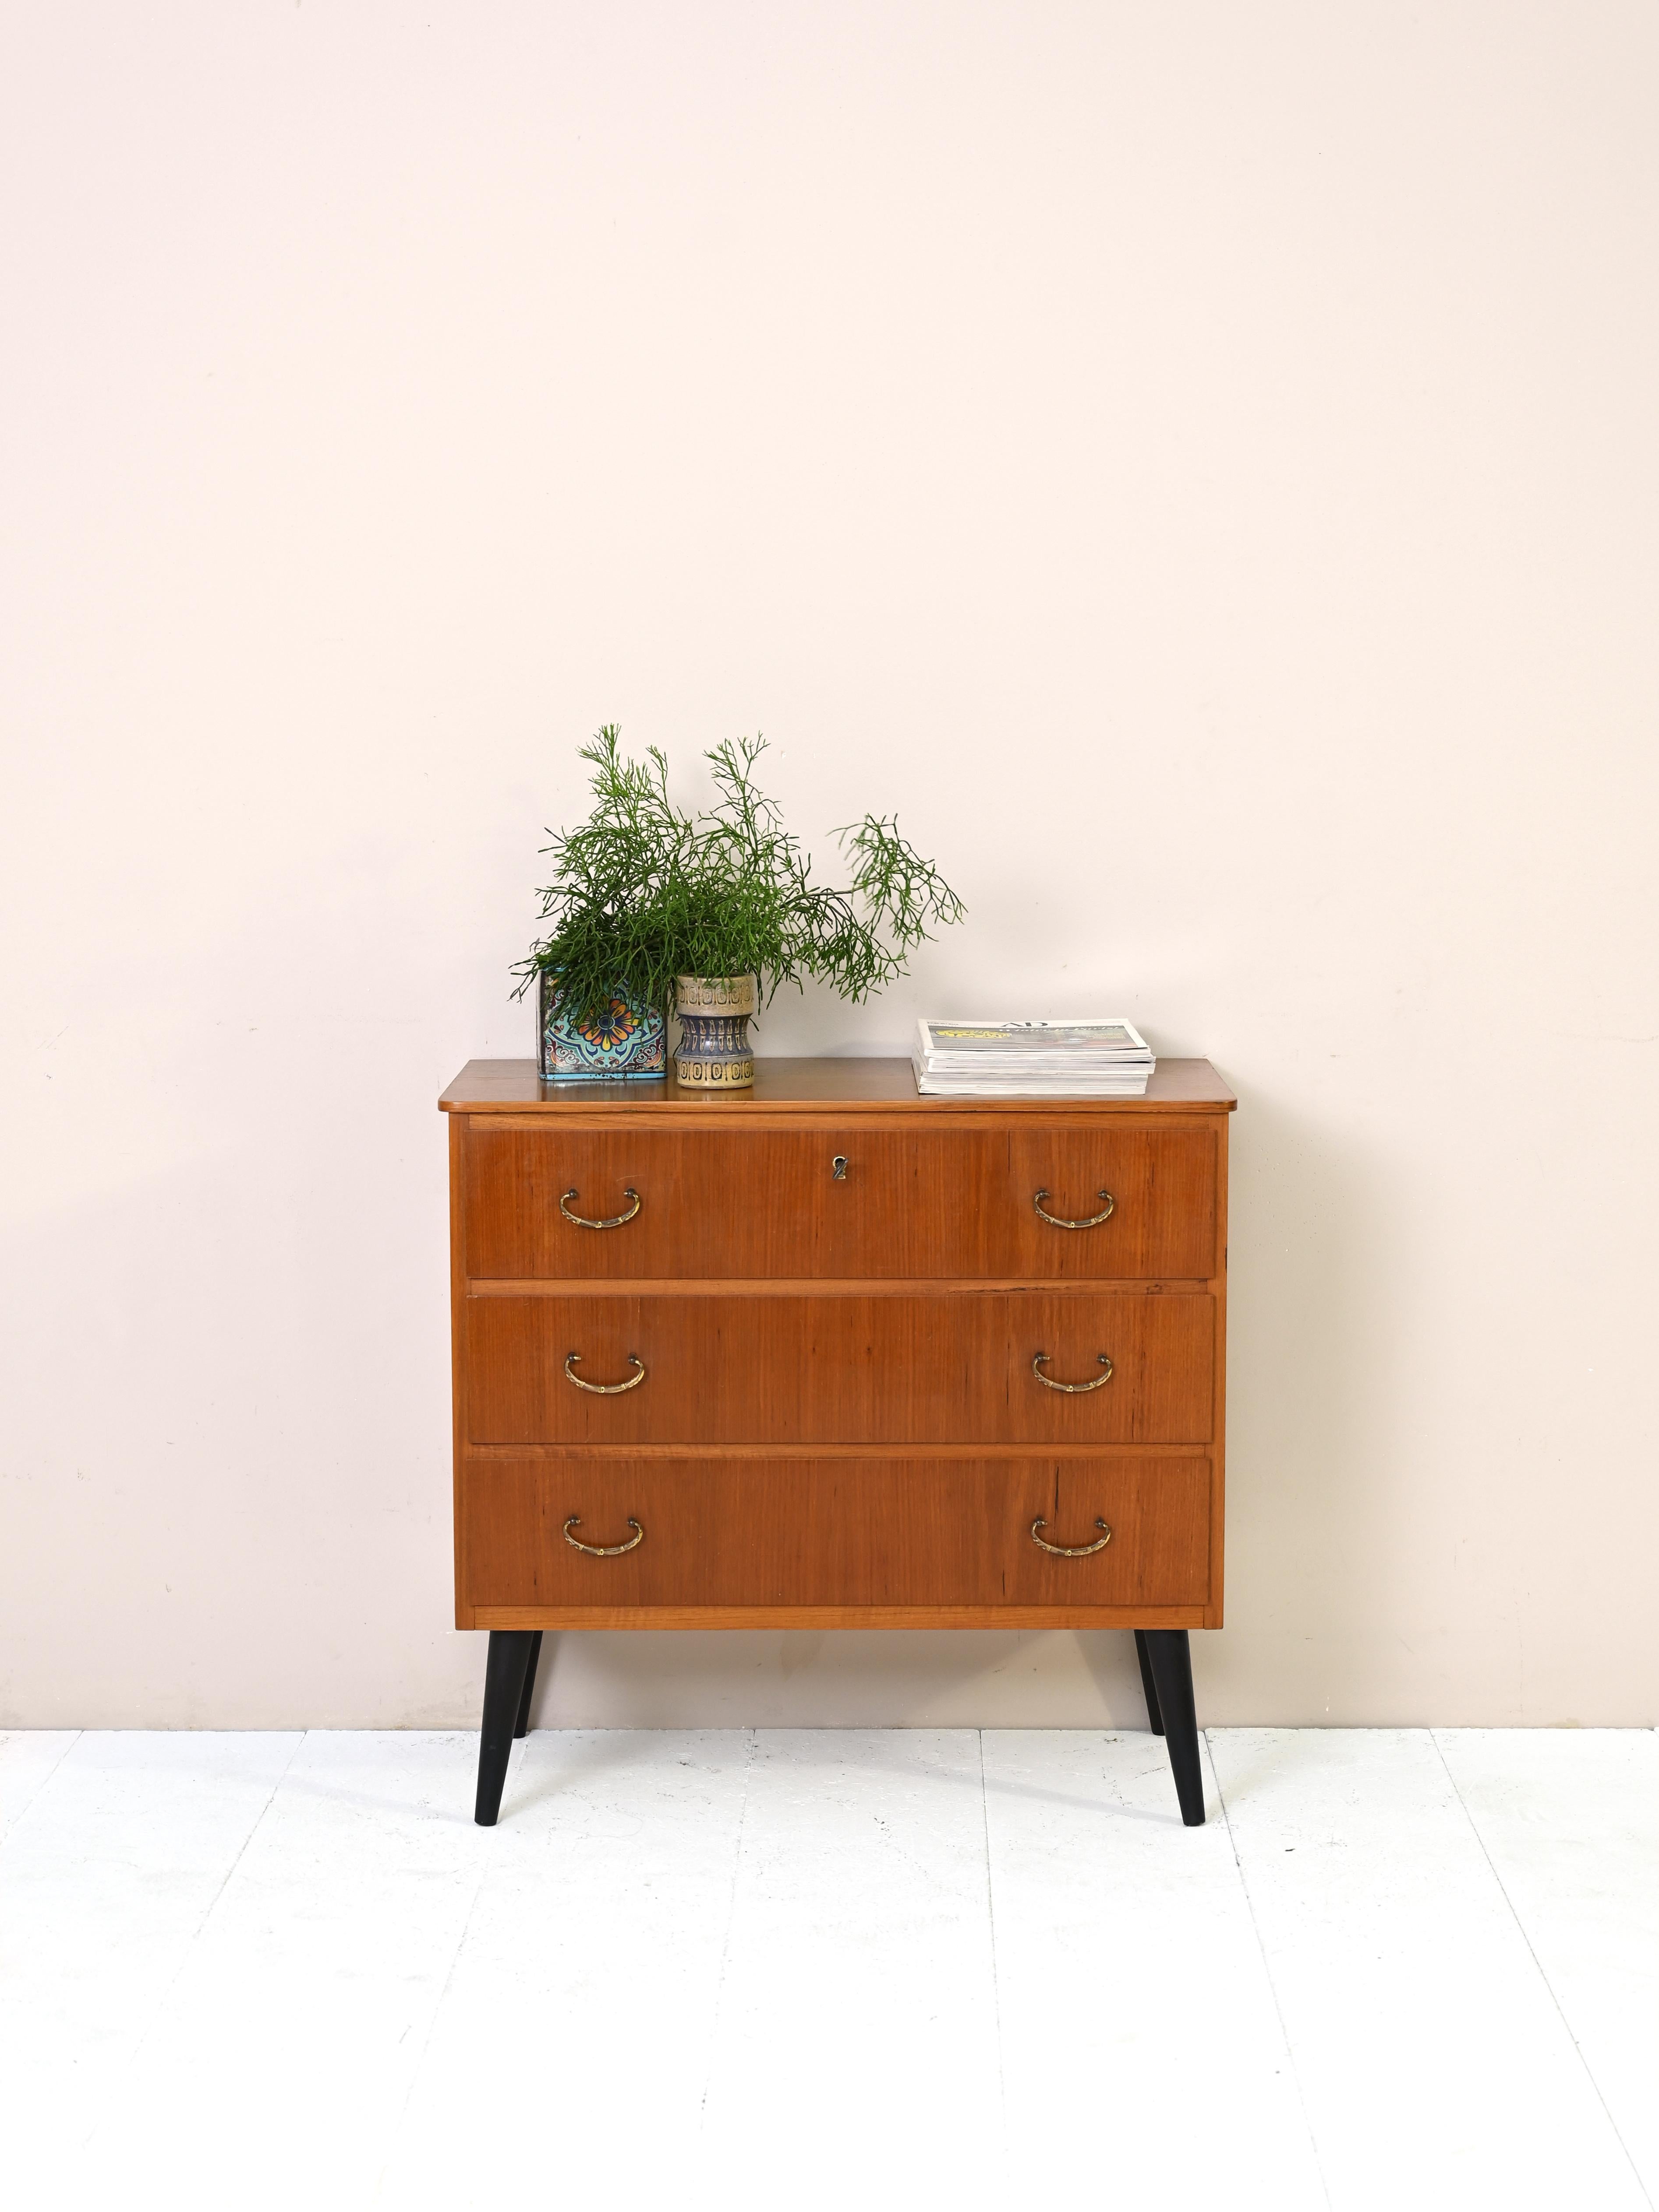 Small vintage cabinet with three drawers, the first of which has a lock.
Embellished with gilded metal handles and wooden legs painted black.
This chest of drawers can be used in any room of the house, also perfect as a capacious
nightstand.

Good